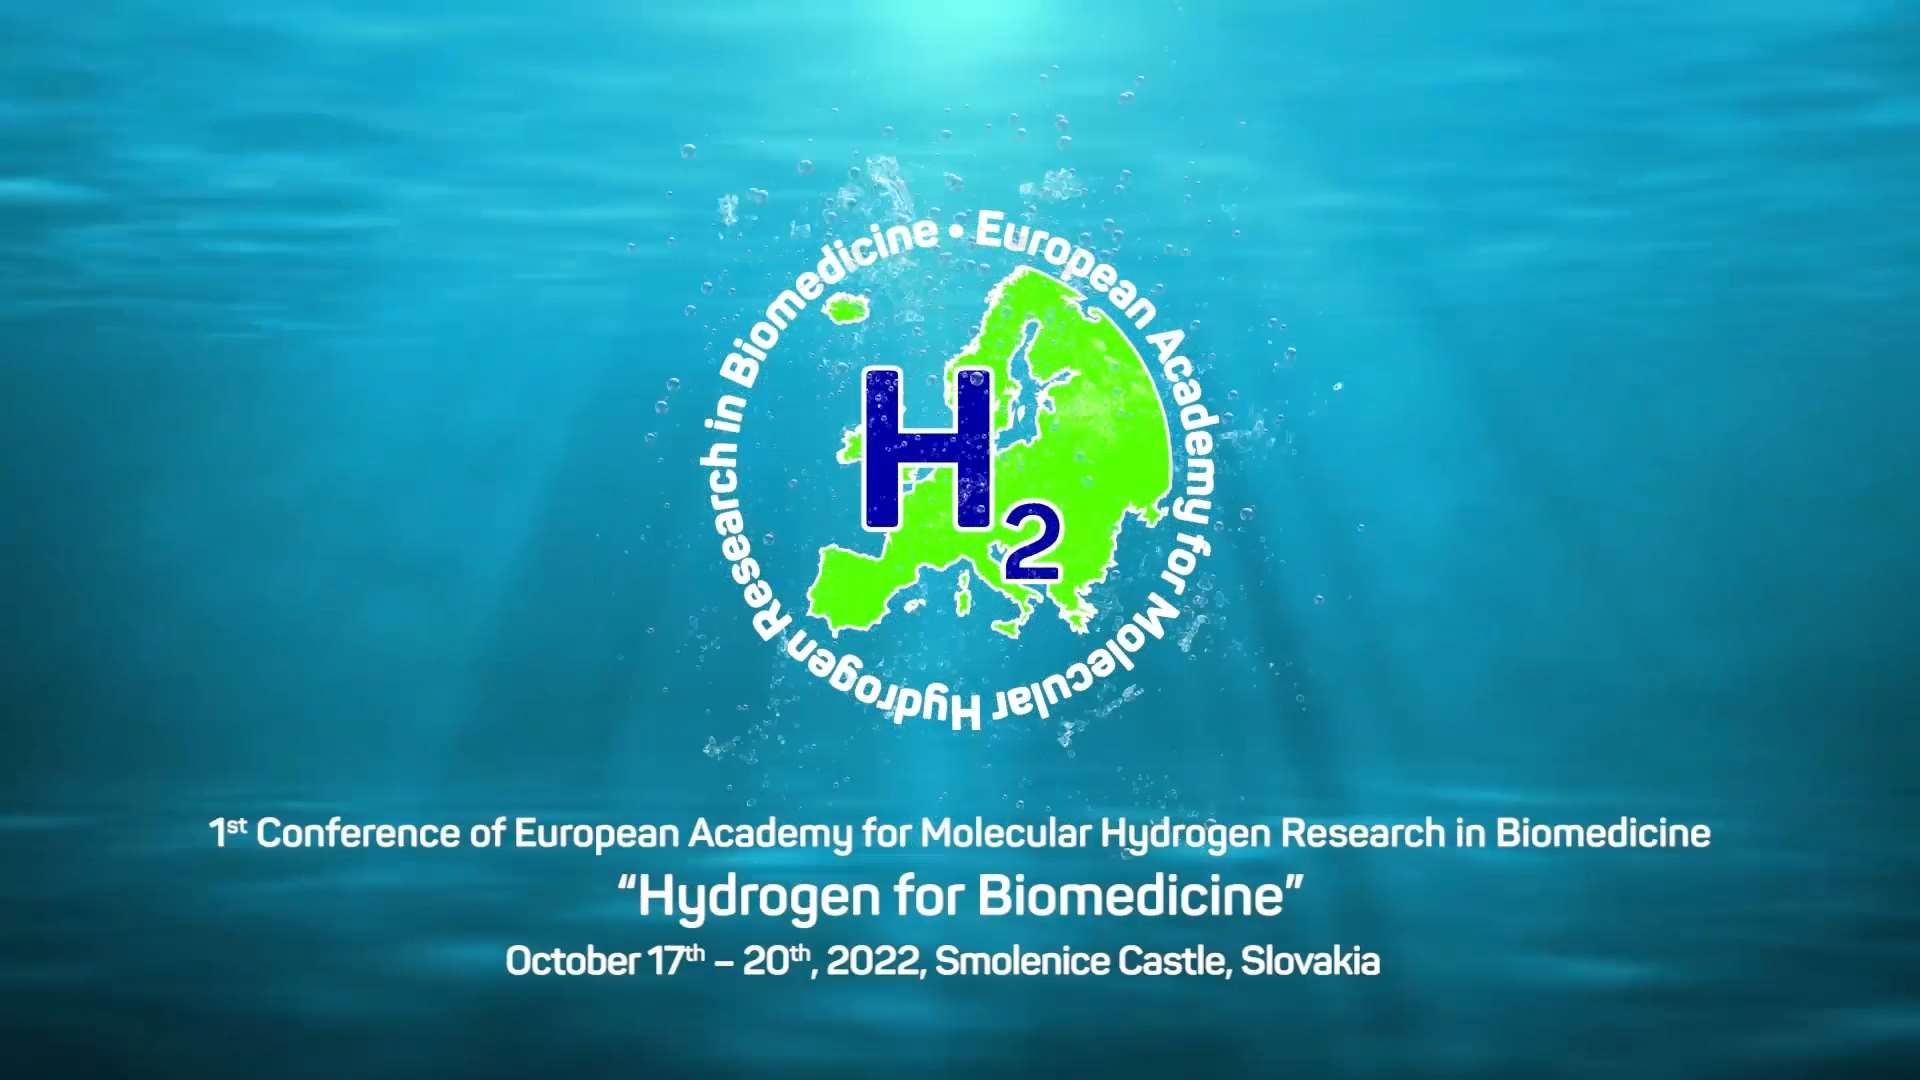 1st conference of European Academy for Molecular Hydrogen Research in Biomedicine “Hydrogen for Biomedicine” course